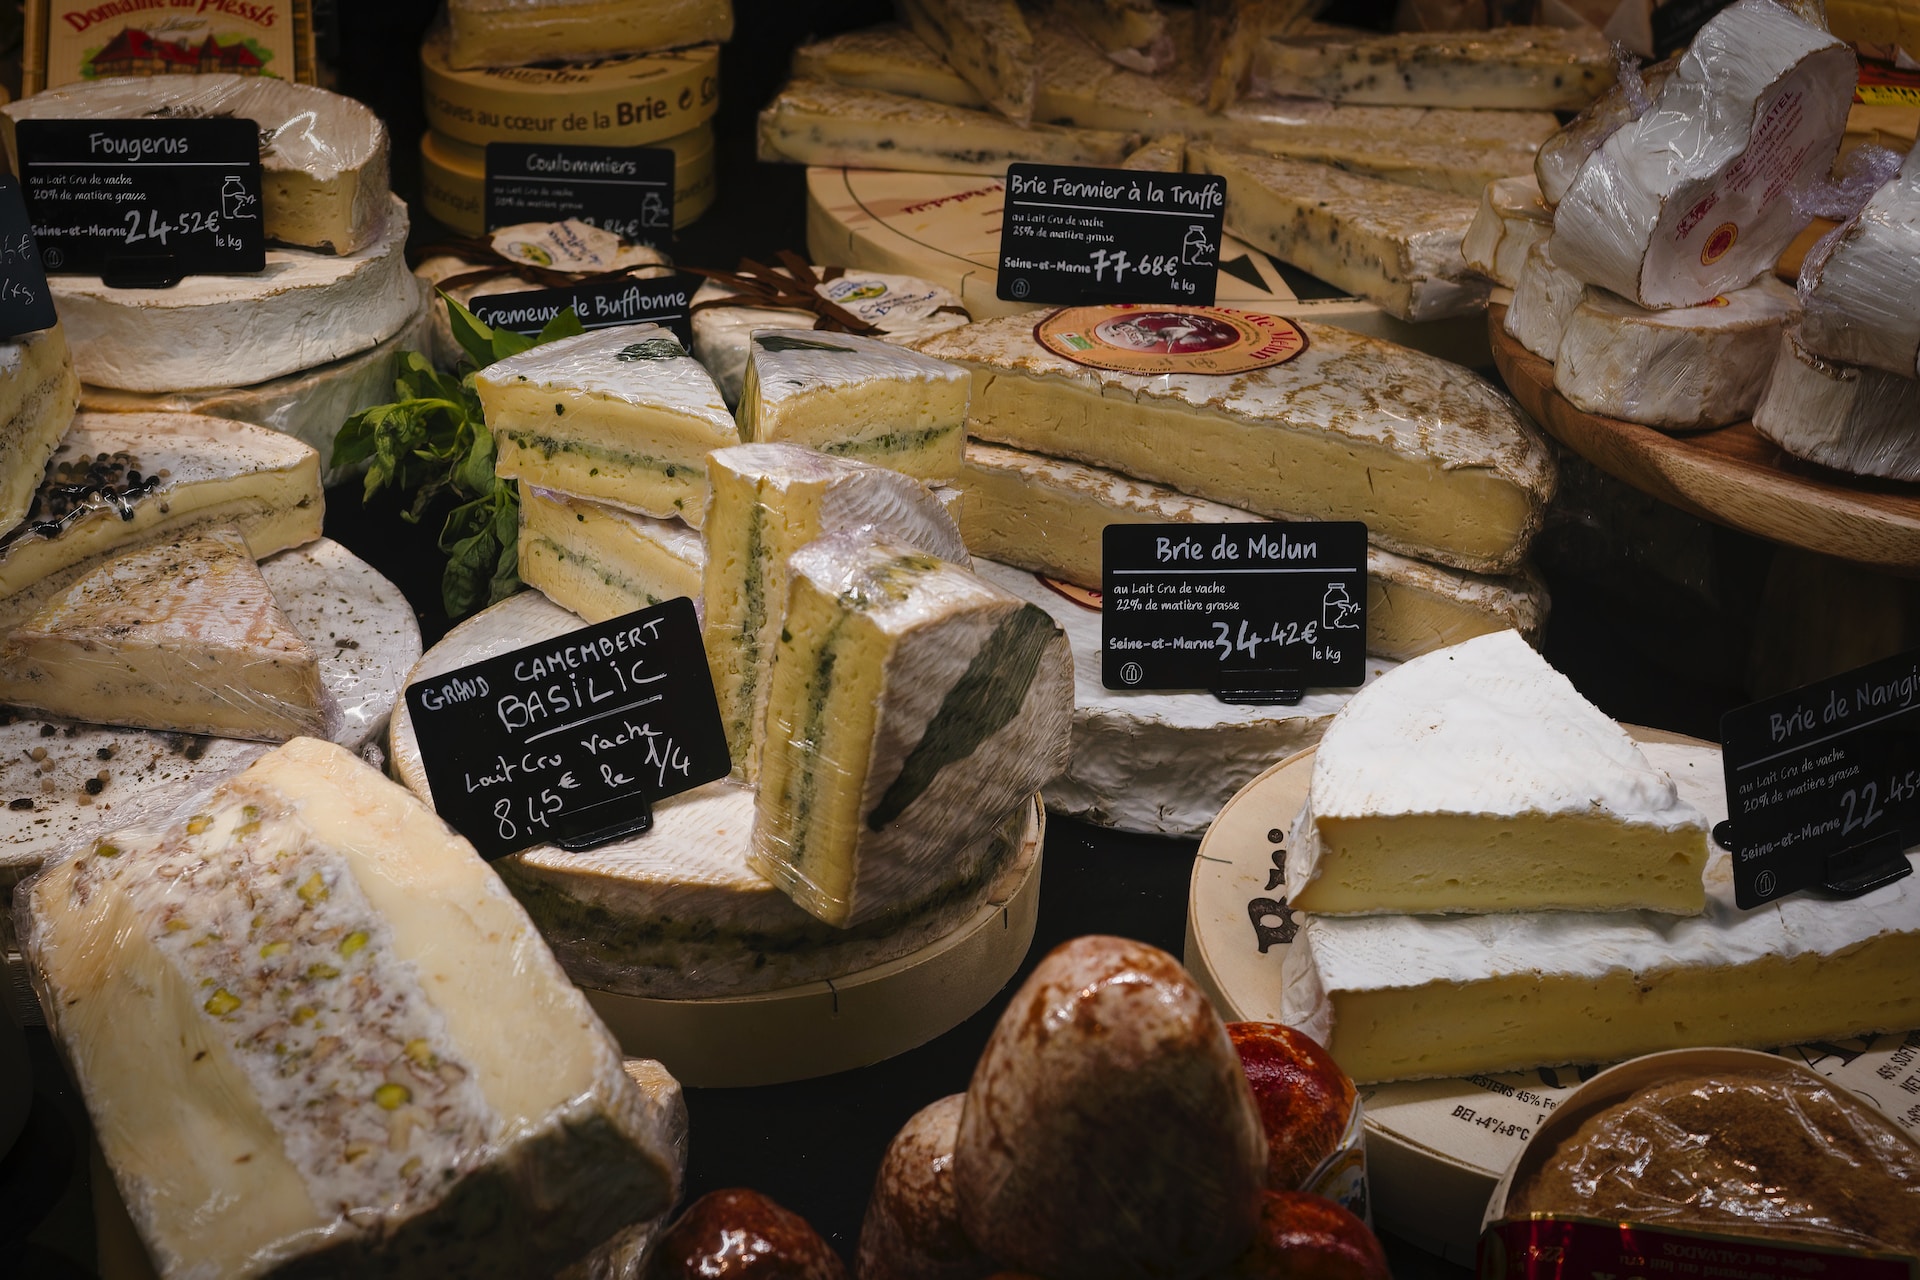 France, cheese, food images & pictures, cover photos & images, French cheese, text, business card, bread, produce